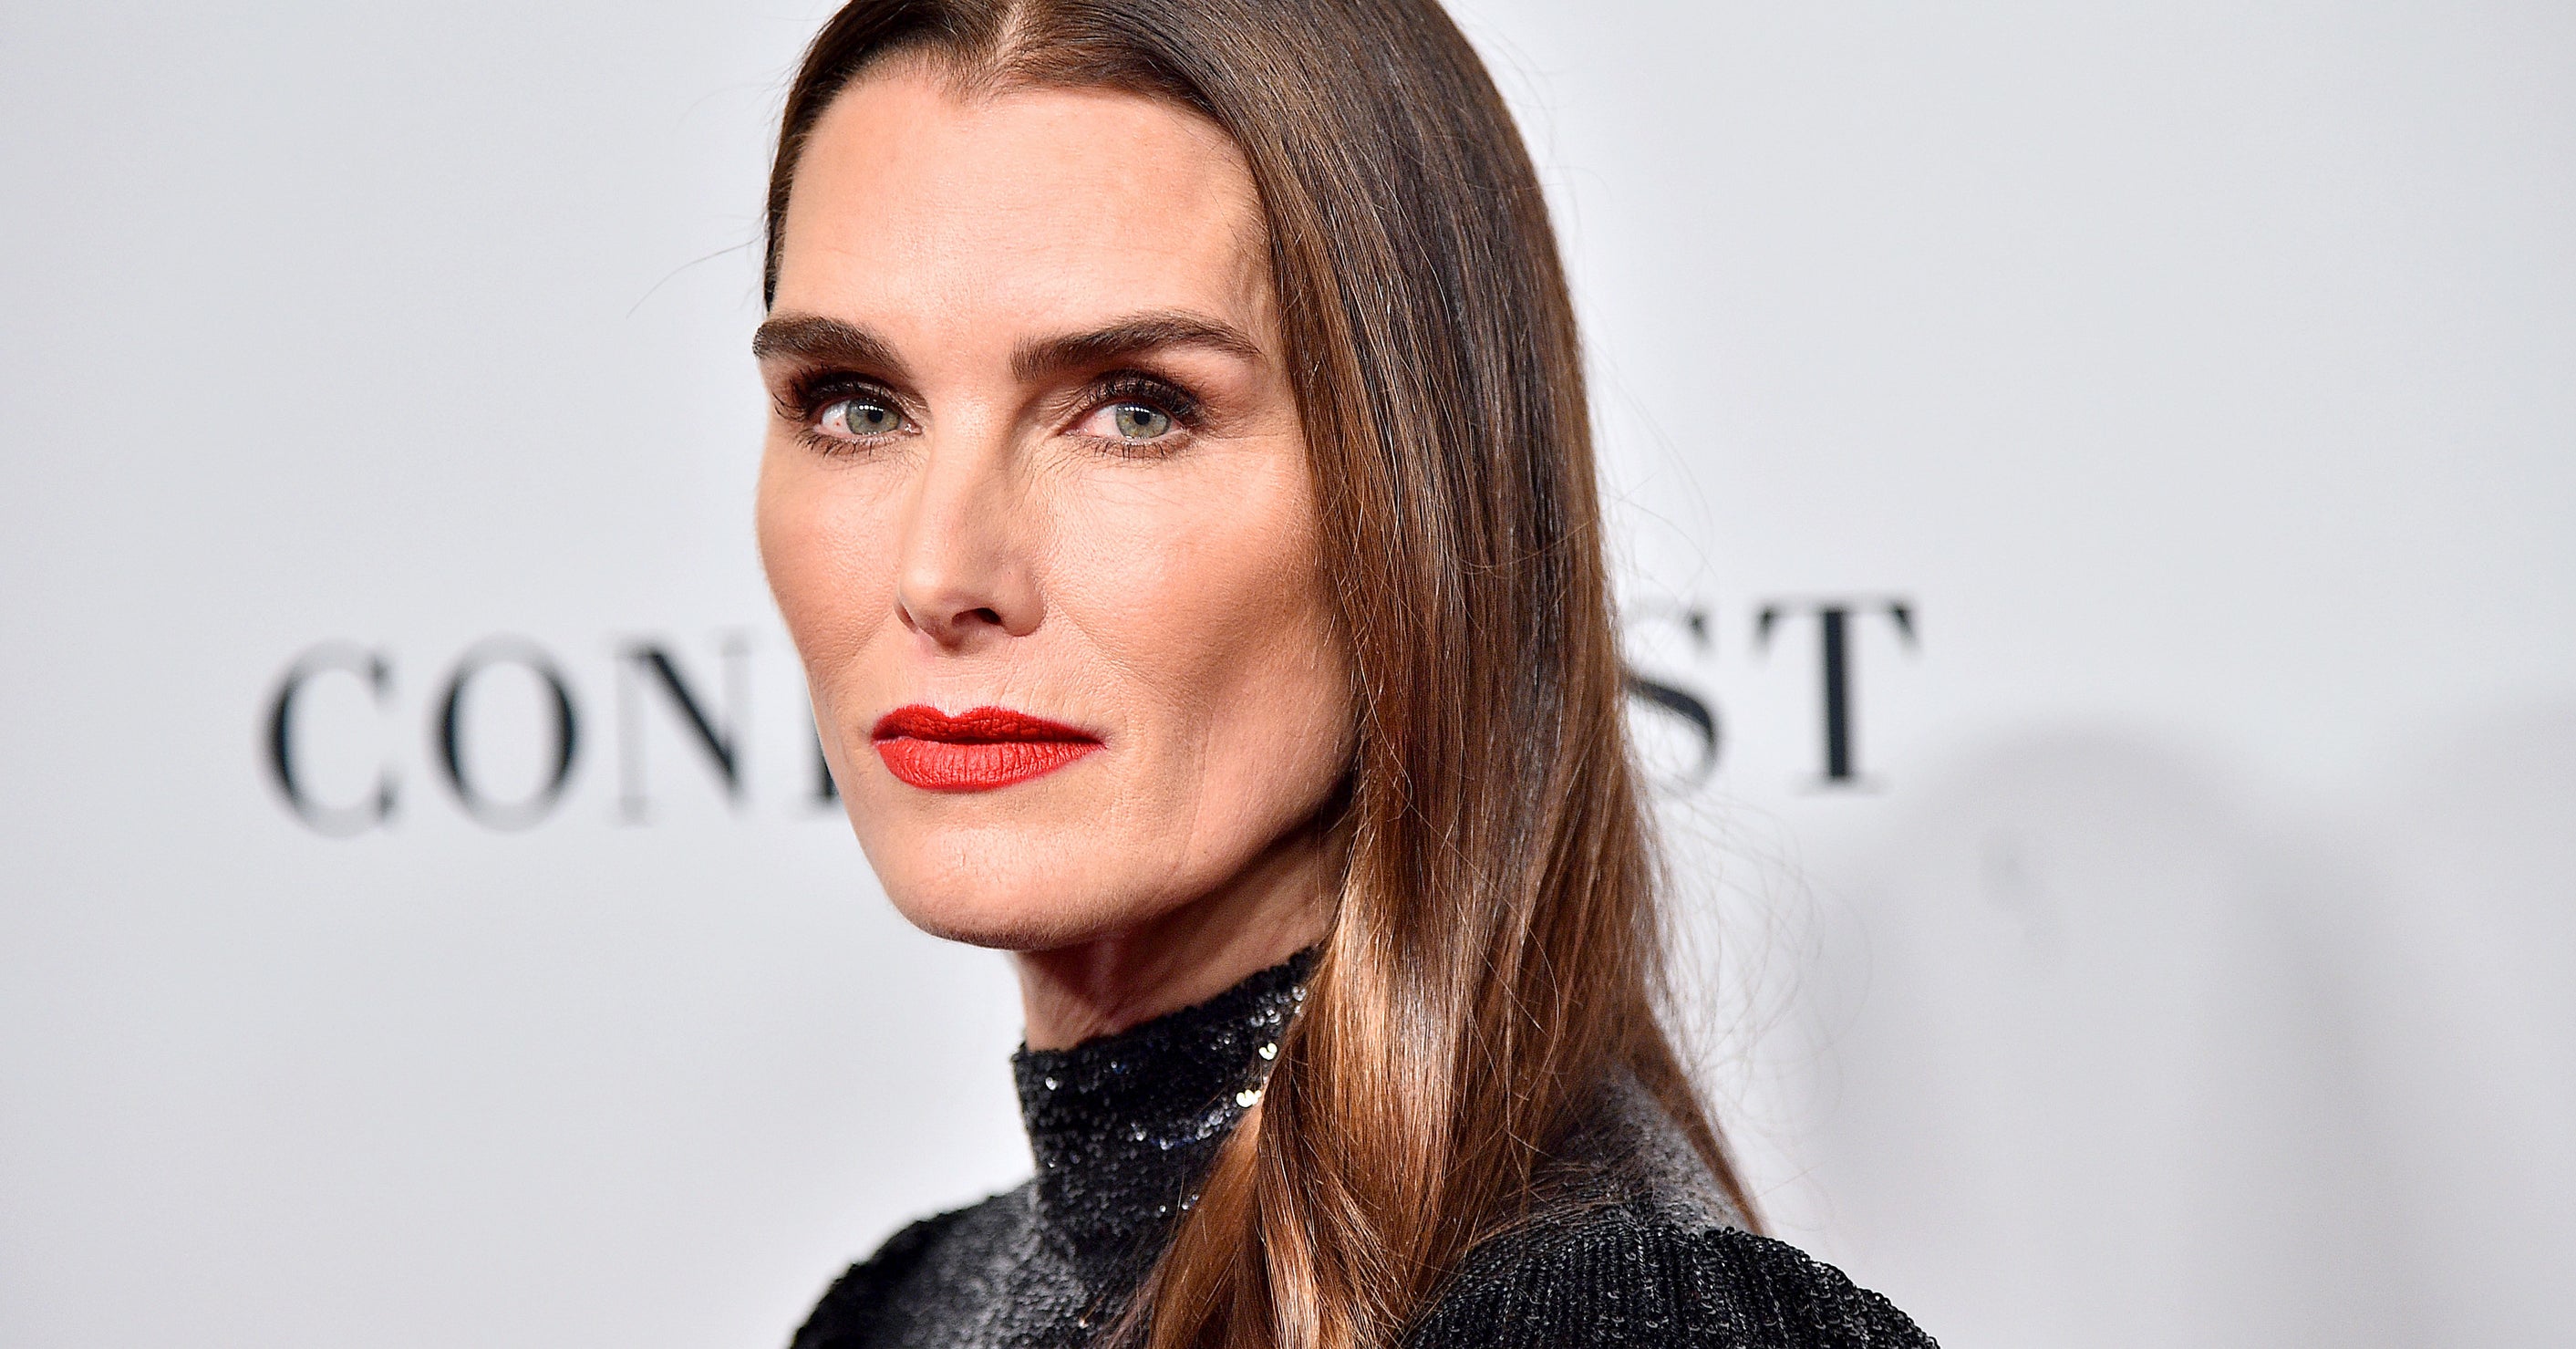 Brooke Shields Regrets Being Open About Her Virginity